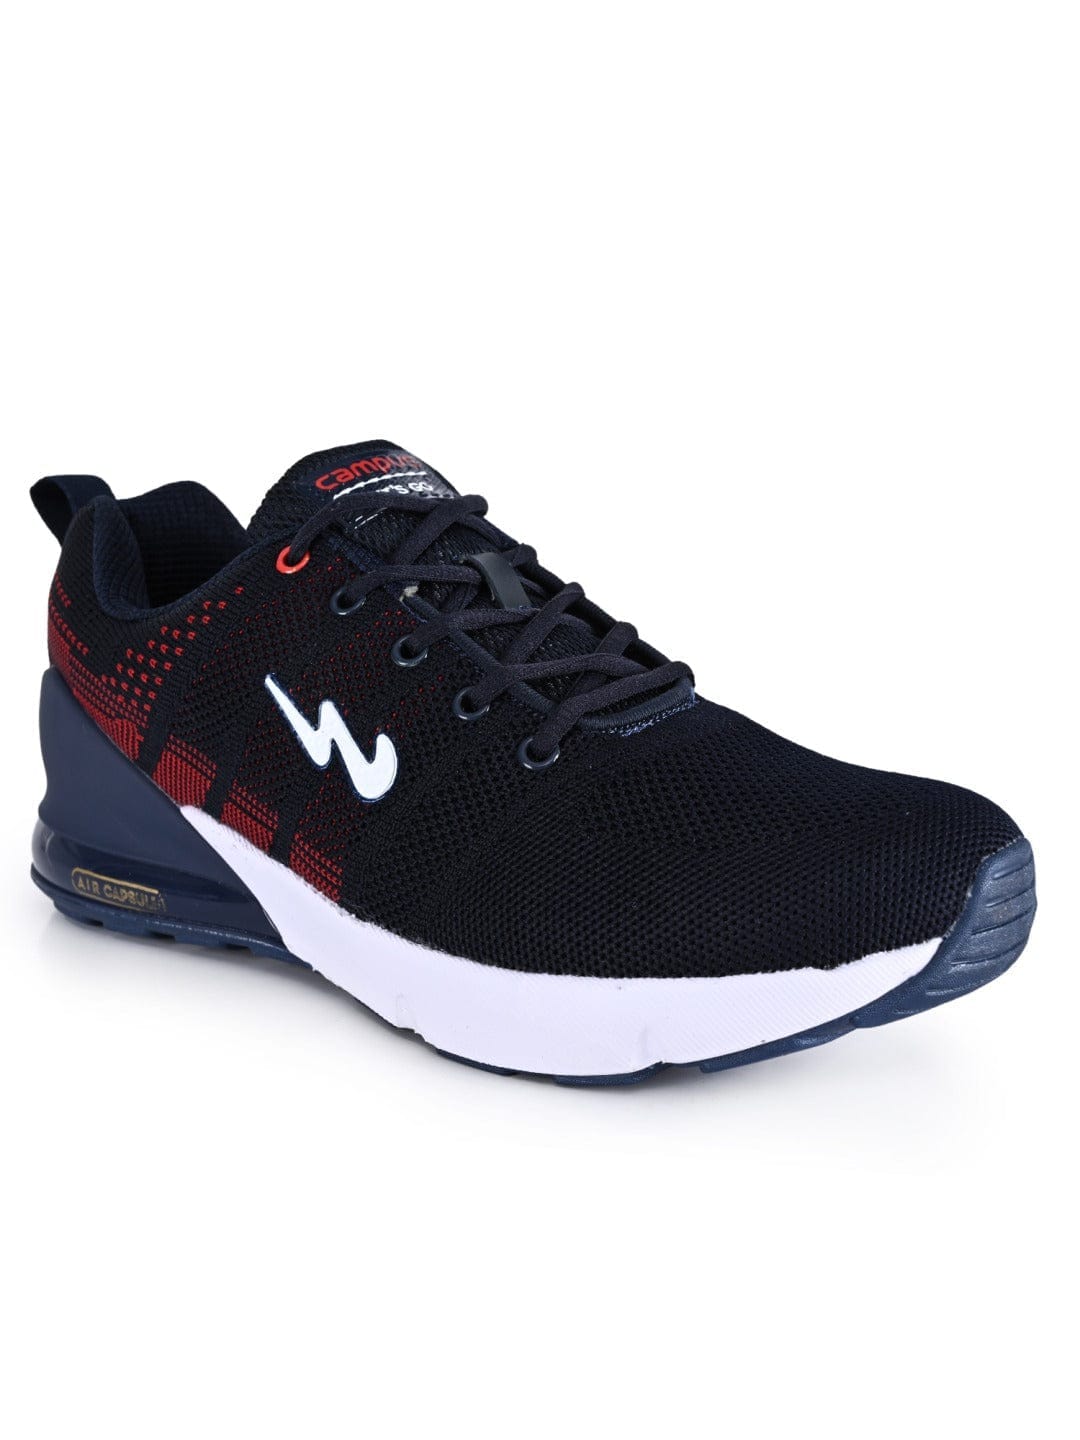 Buy SYRUS Blue Men's Running Shoes online | Campus Shoes